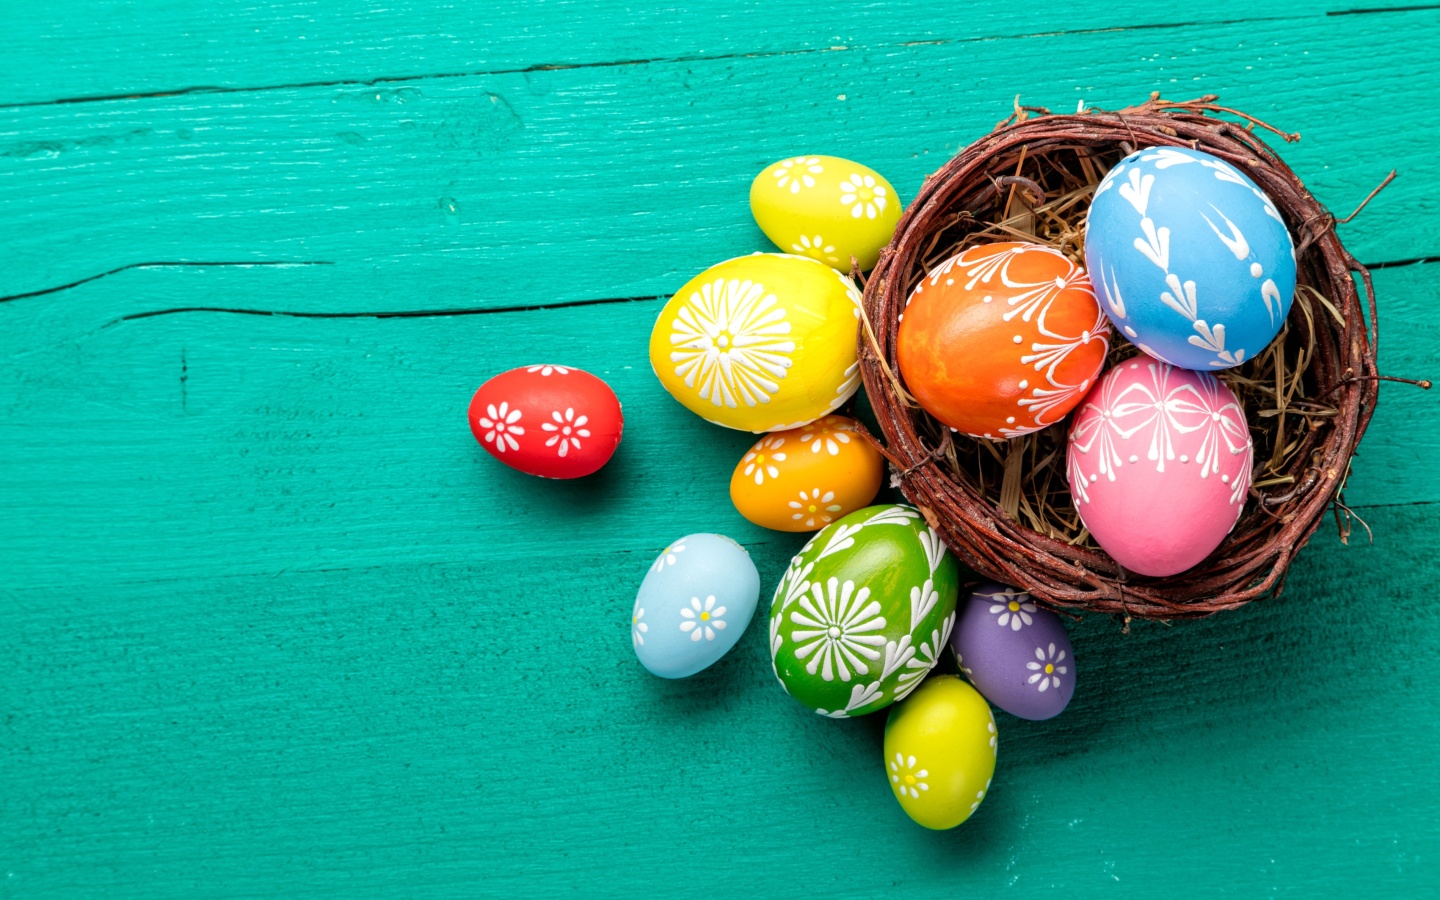 Dyed easter eggs wallpaper 1440x900